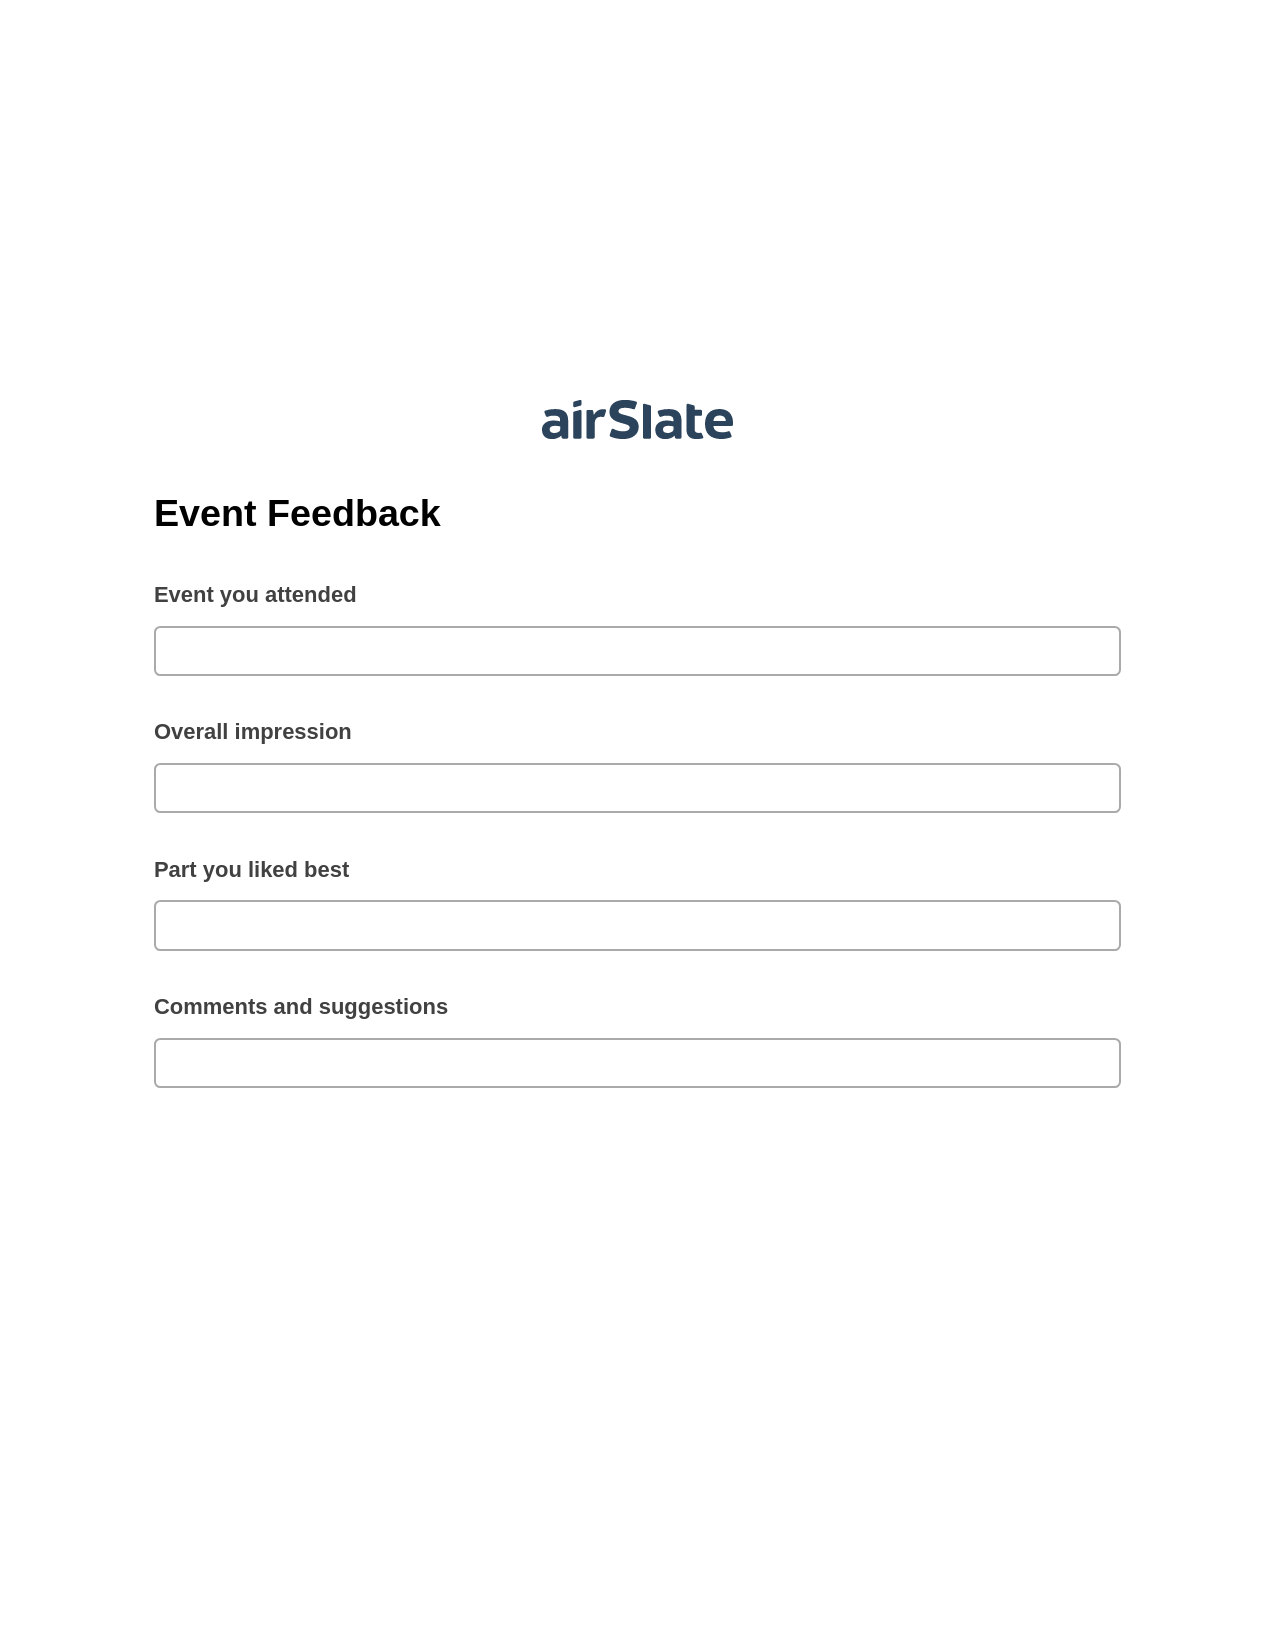 Event Feedback System Bot - Slack Two-Way Binding Bot, Create MS Dynamics 365 Records Bot, Export to Excel 365 Bot